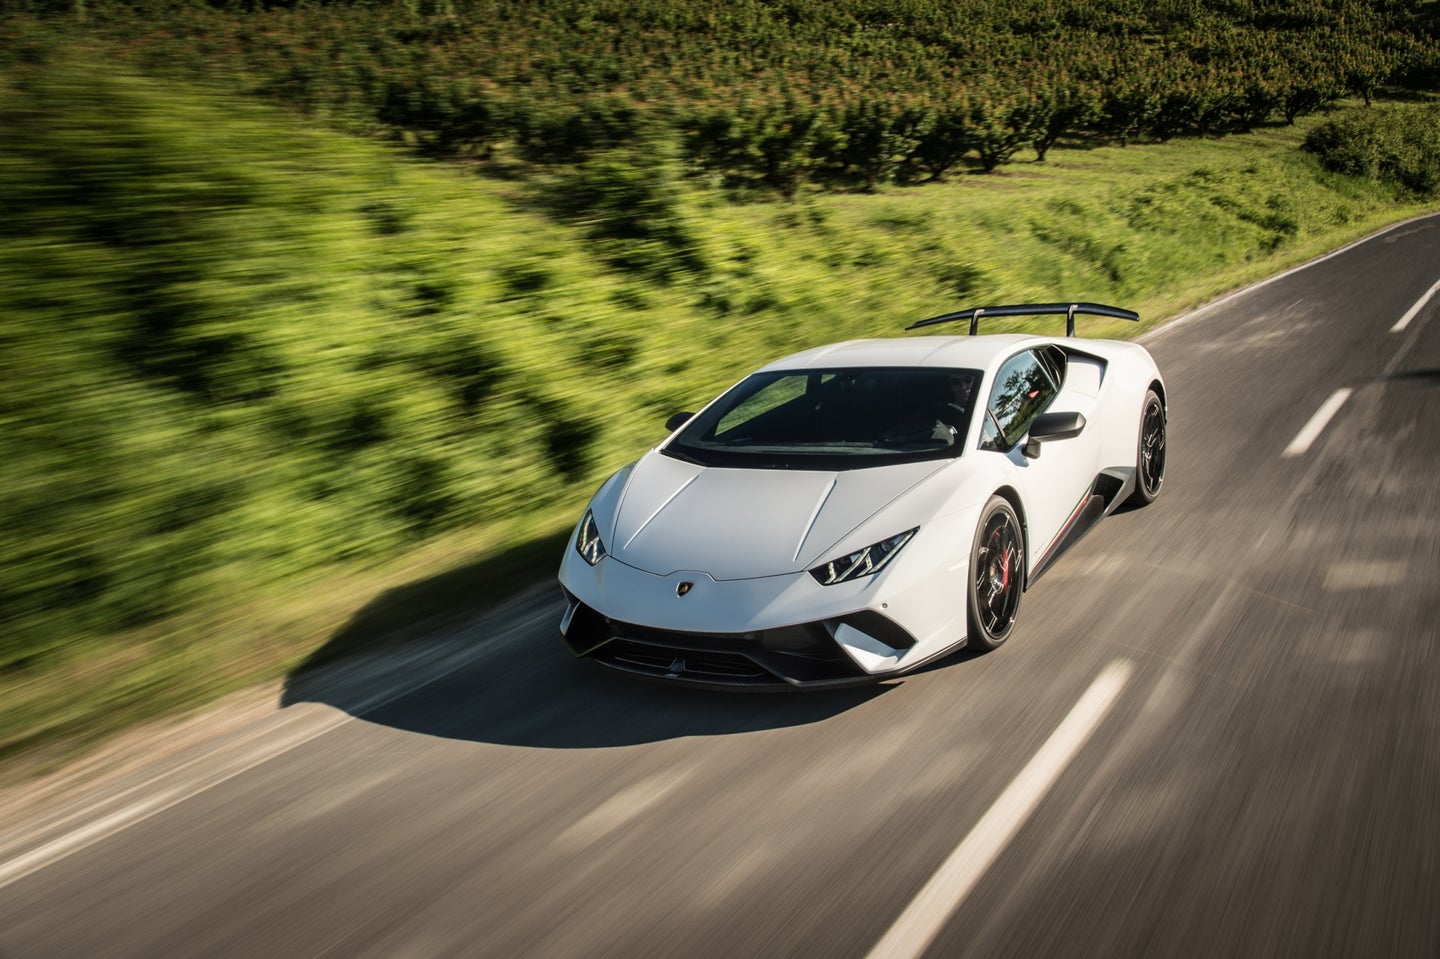 Lamborghini Will Disable Huracan’s Launch Control After Just 250 Uses: Report